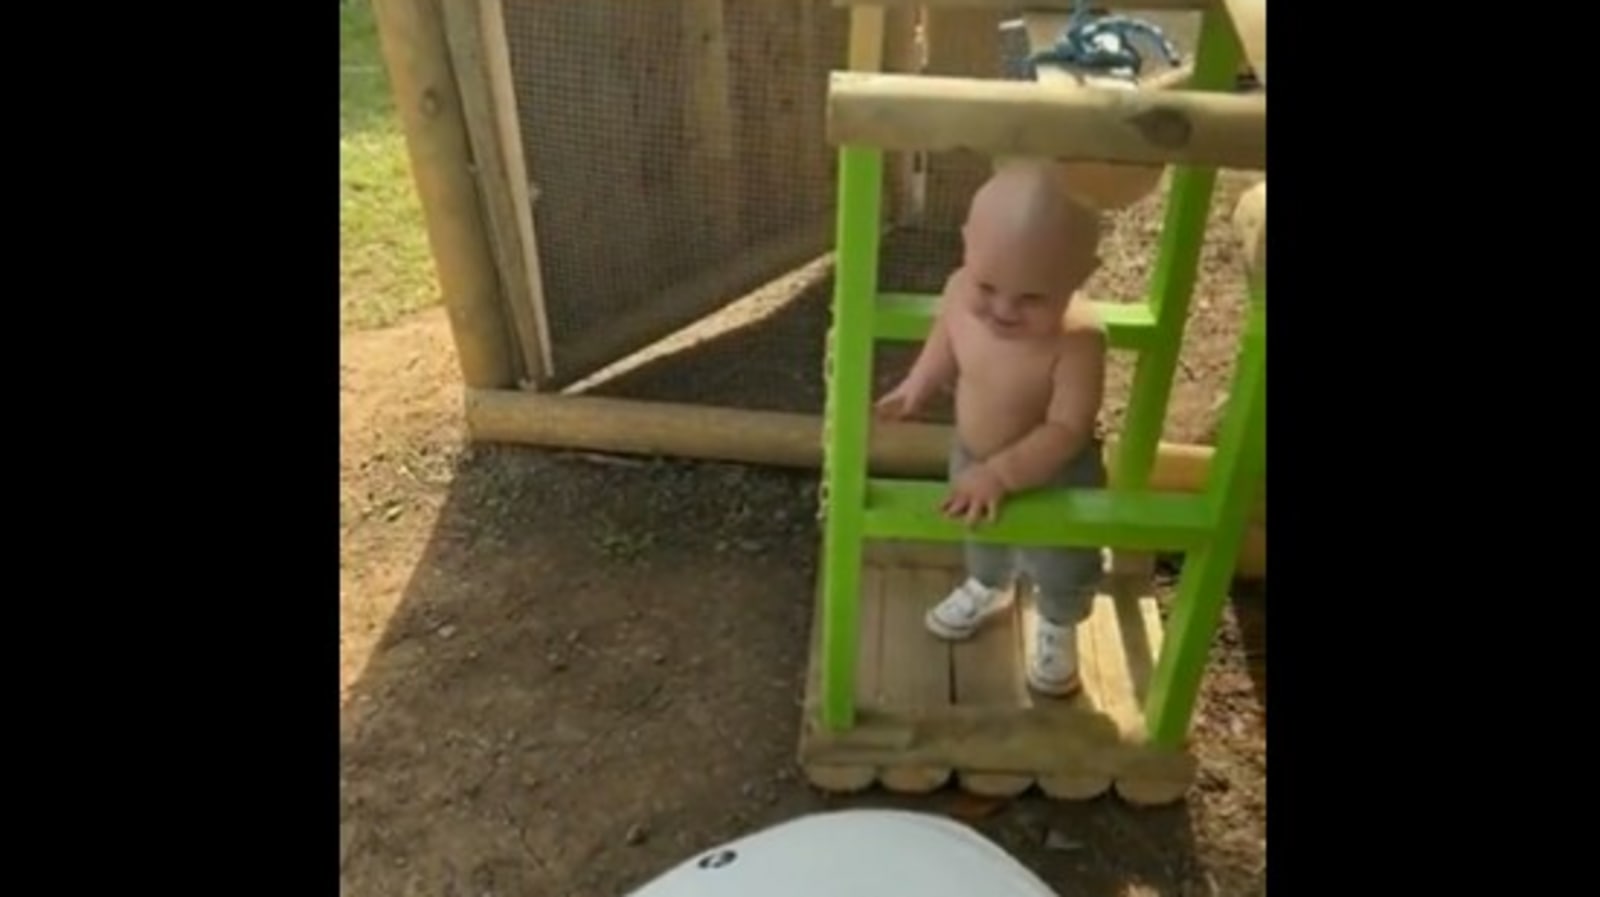 Dad builds a playhouse with an elevator for kid. Watch how the little one reacts